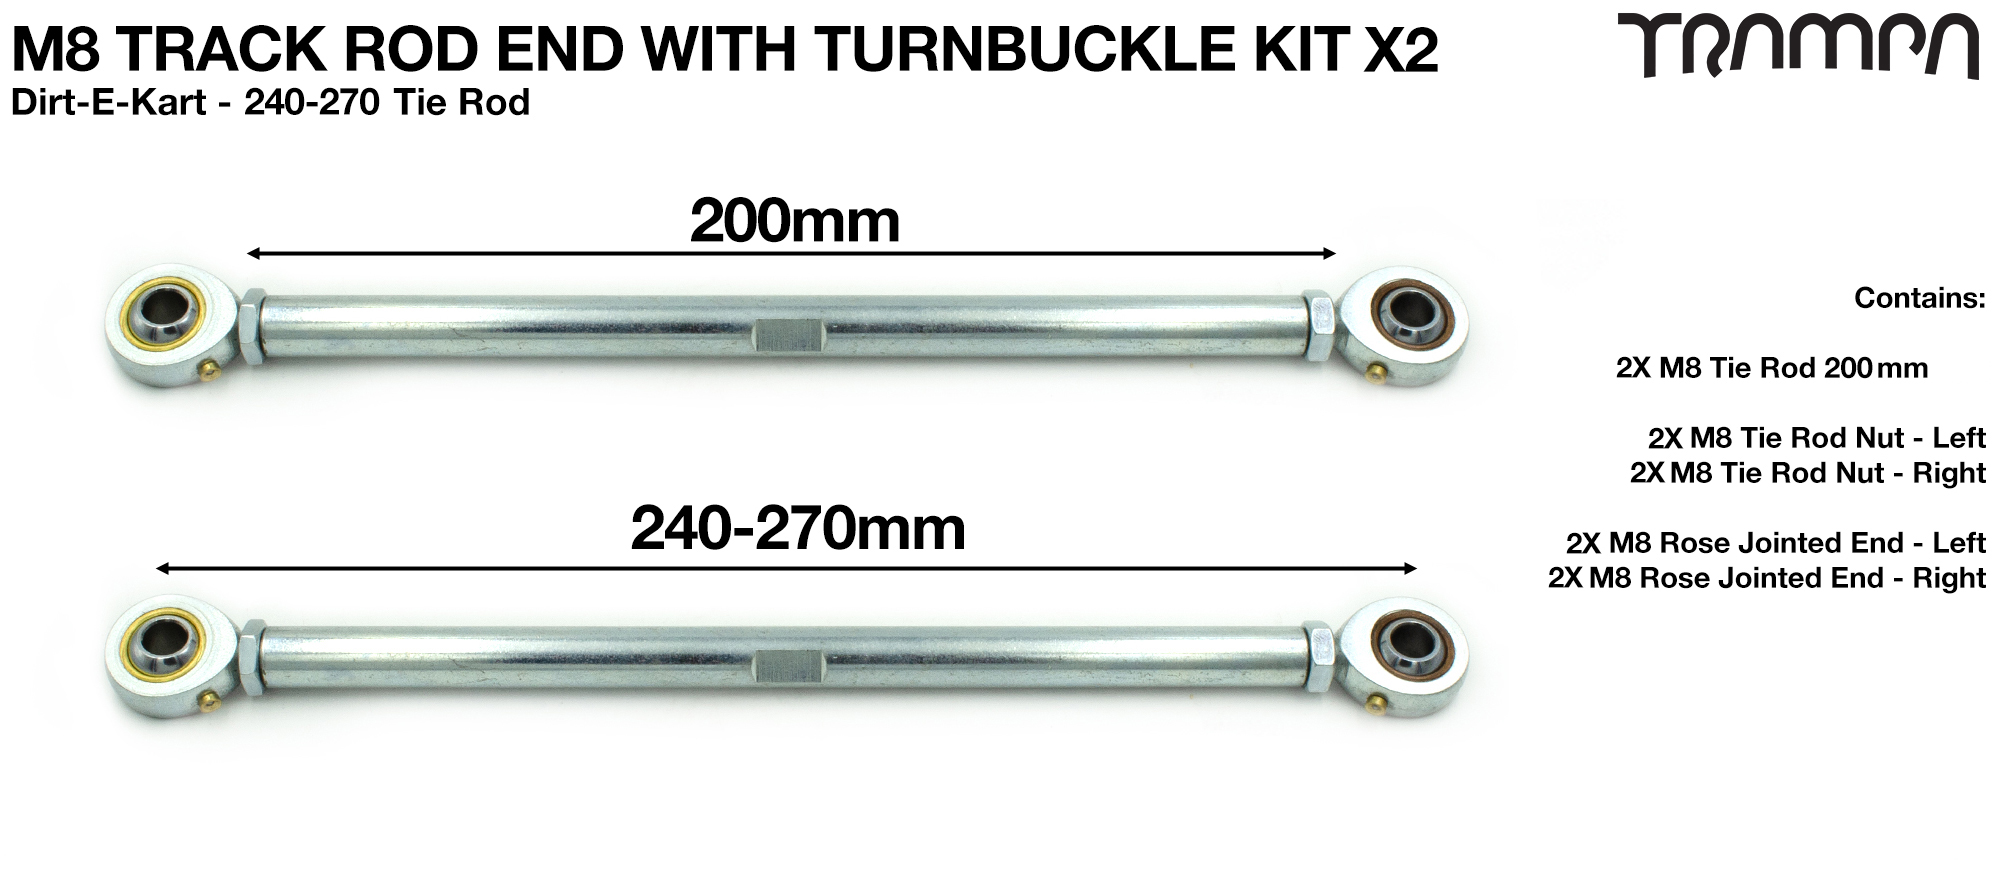 Rose Jointed M8 Track Rod End with Turnbuckle Adjustment 240-270mm x2